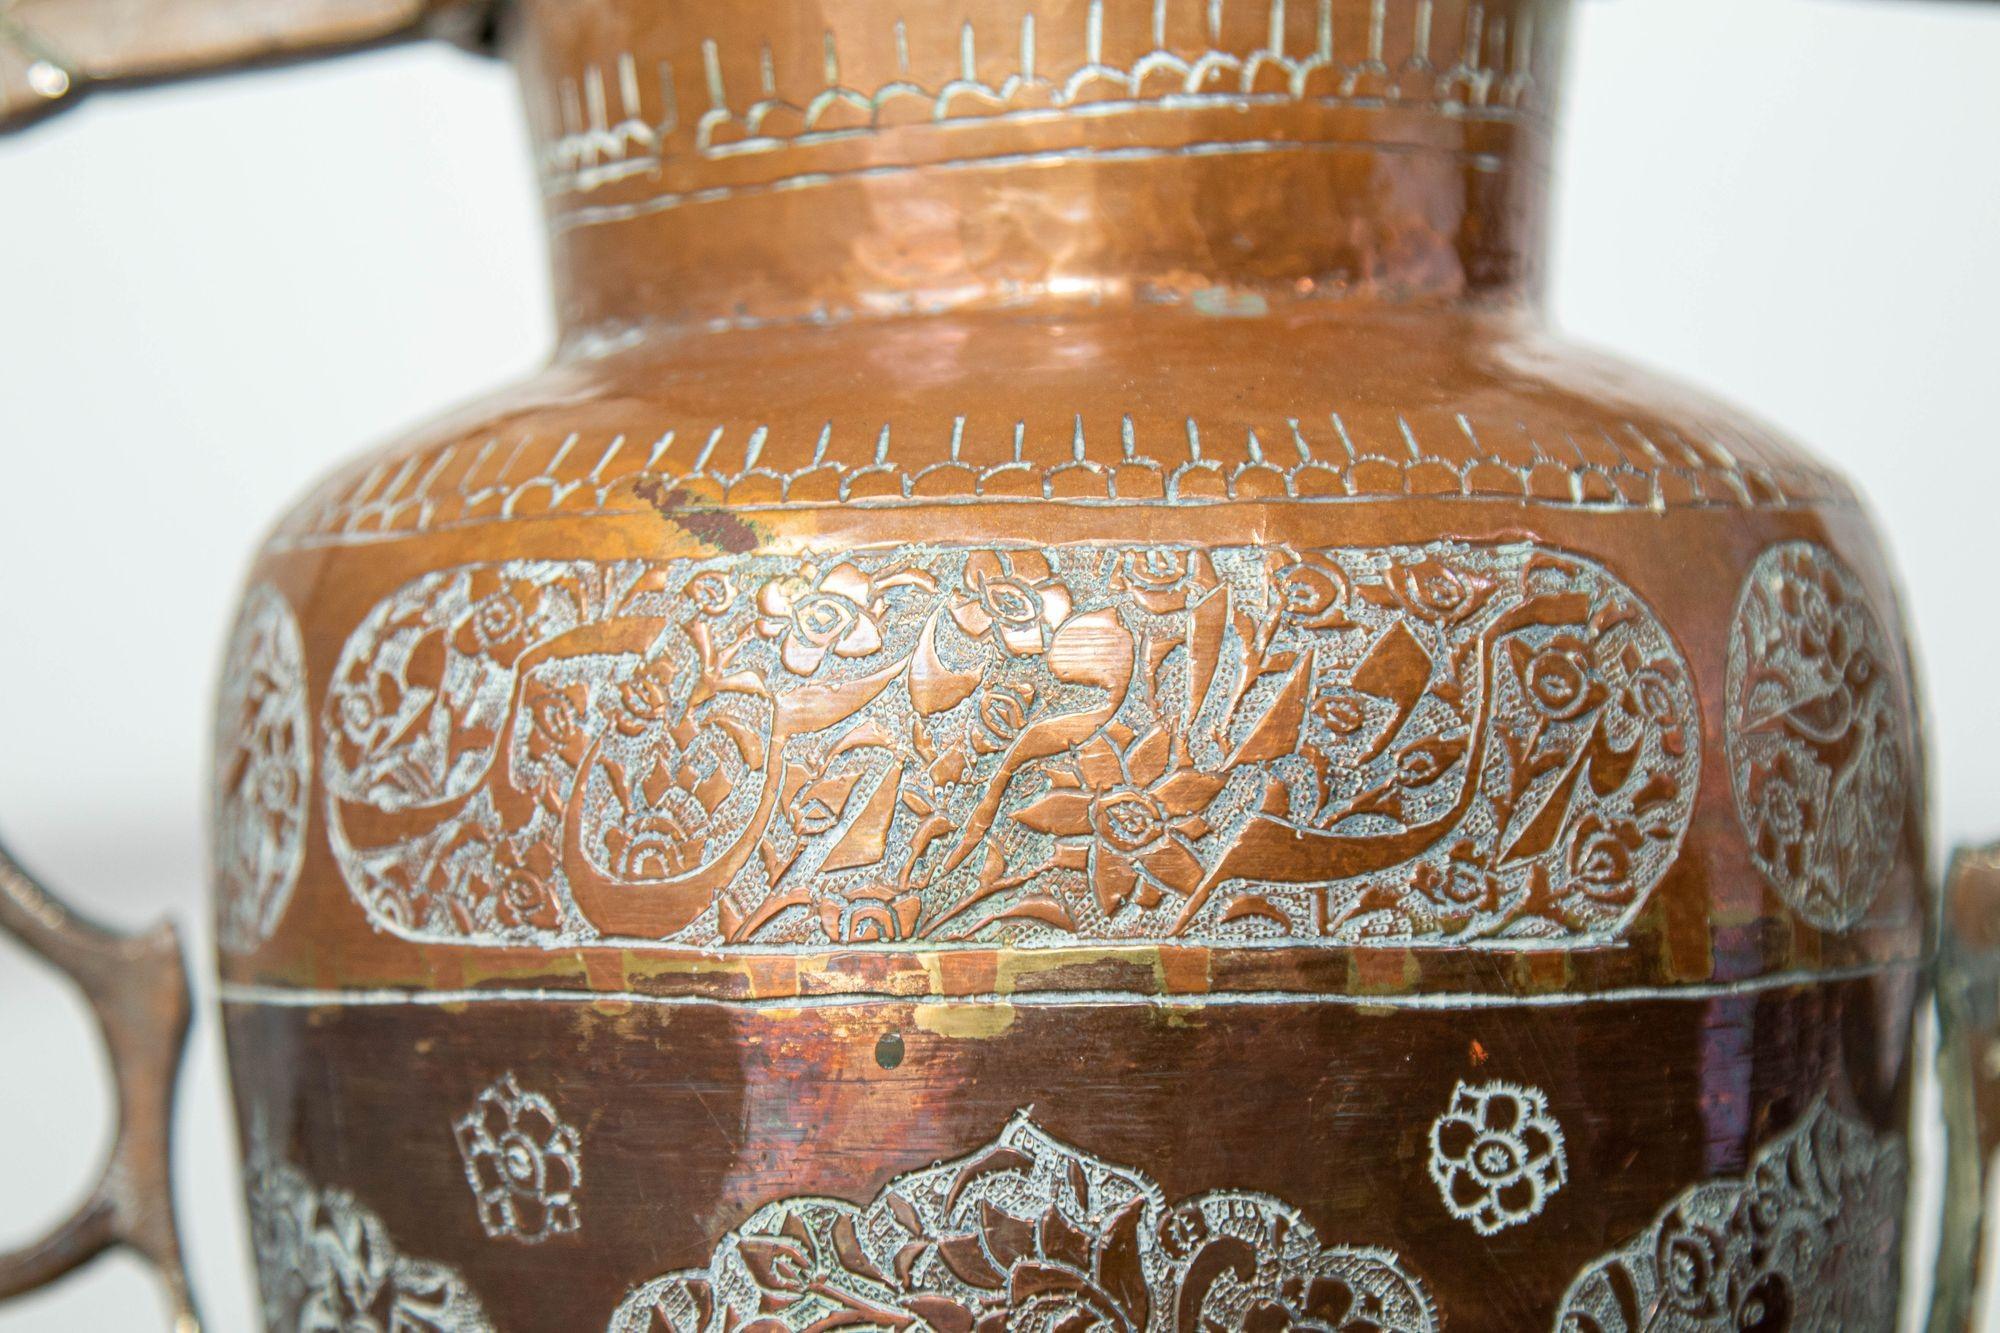 19th Century Antique Middle Eastern Islamic Copper Vase with Handles For Sale